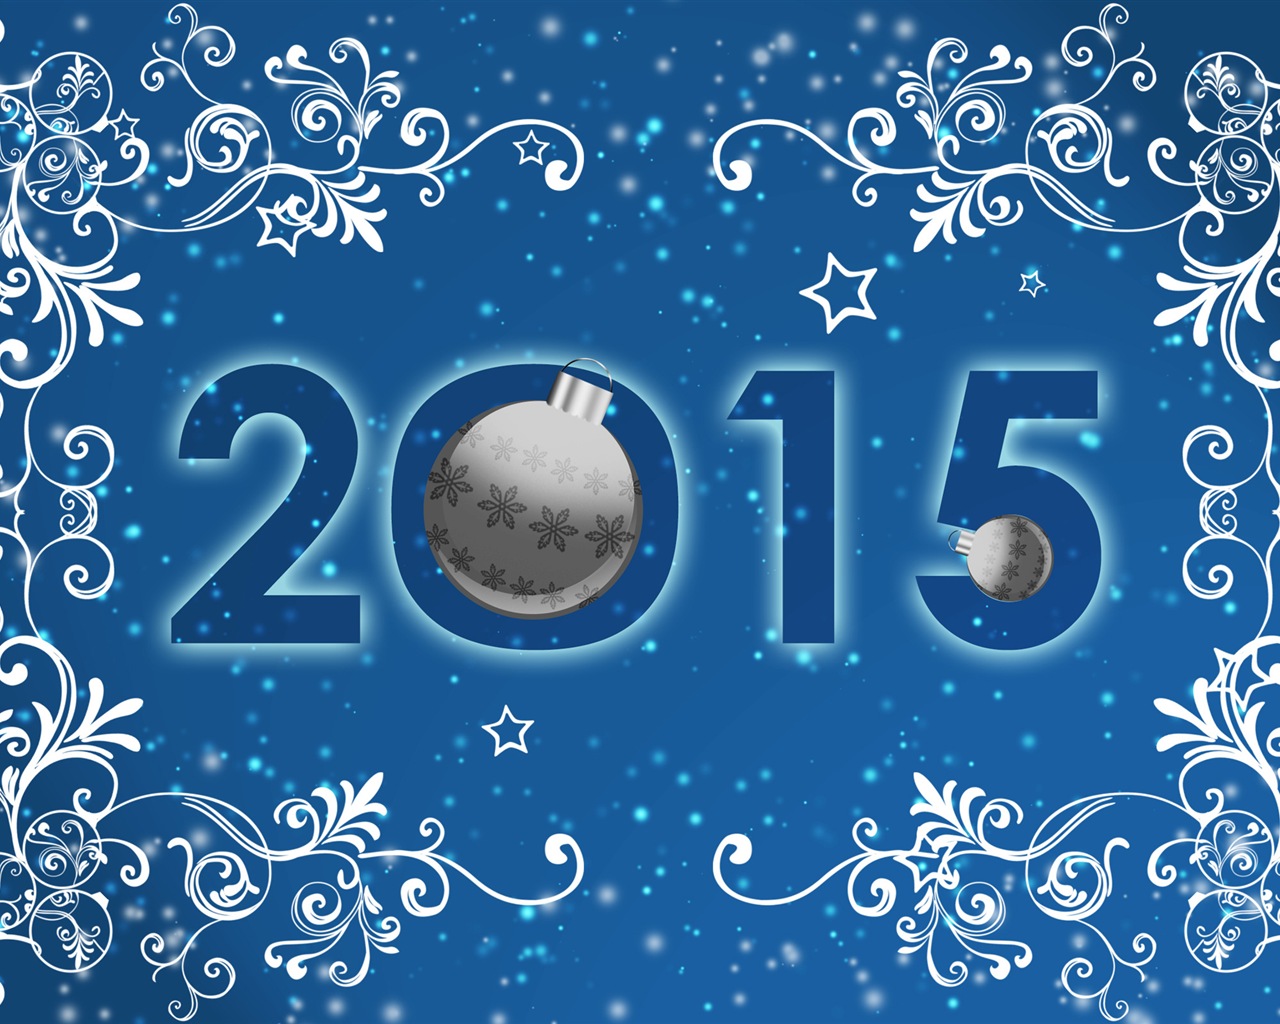 2015 New Year theme HD wallpapers (1) #8 - 1280x1024